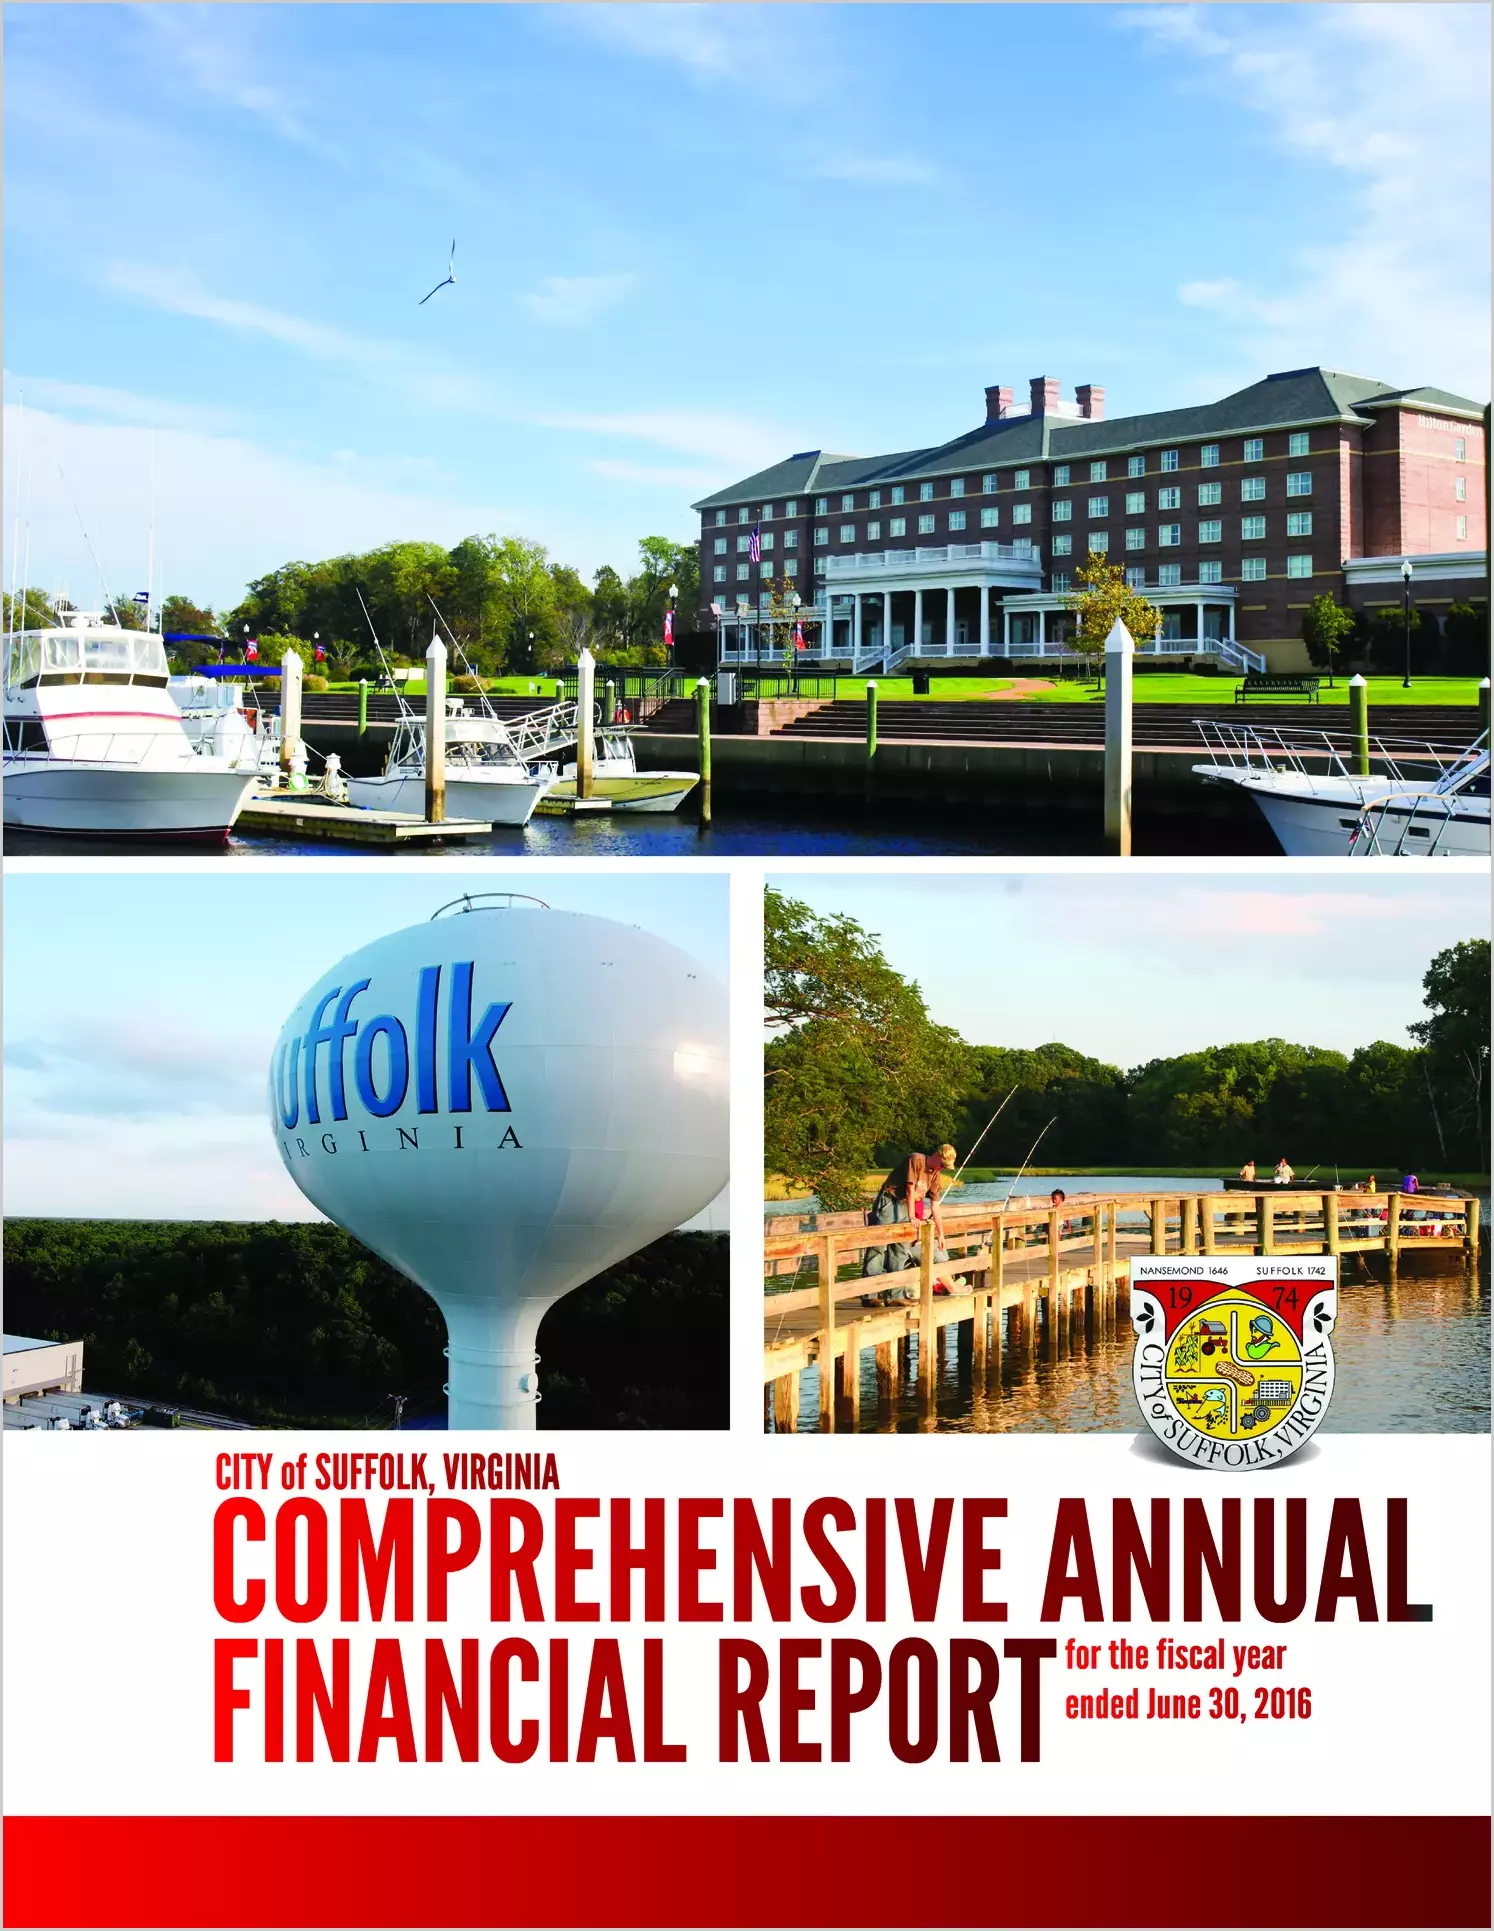 2016 Annual Financial Report for City of Suffolk